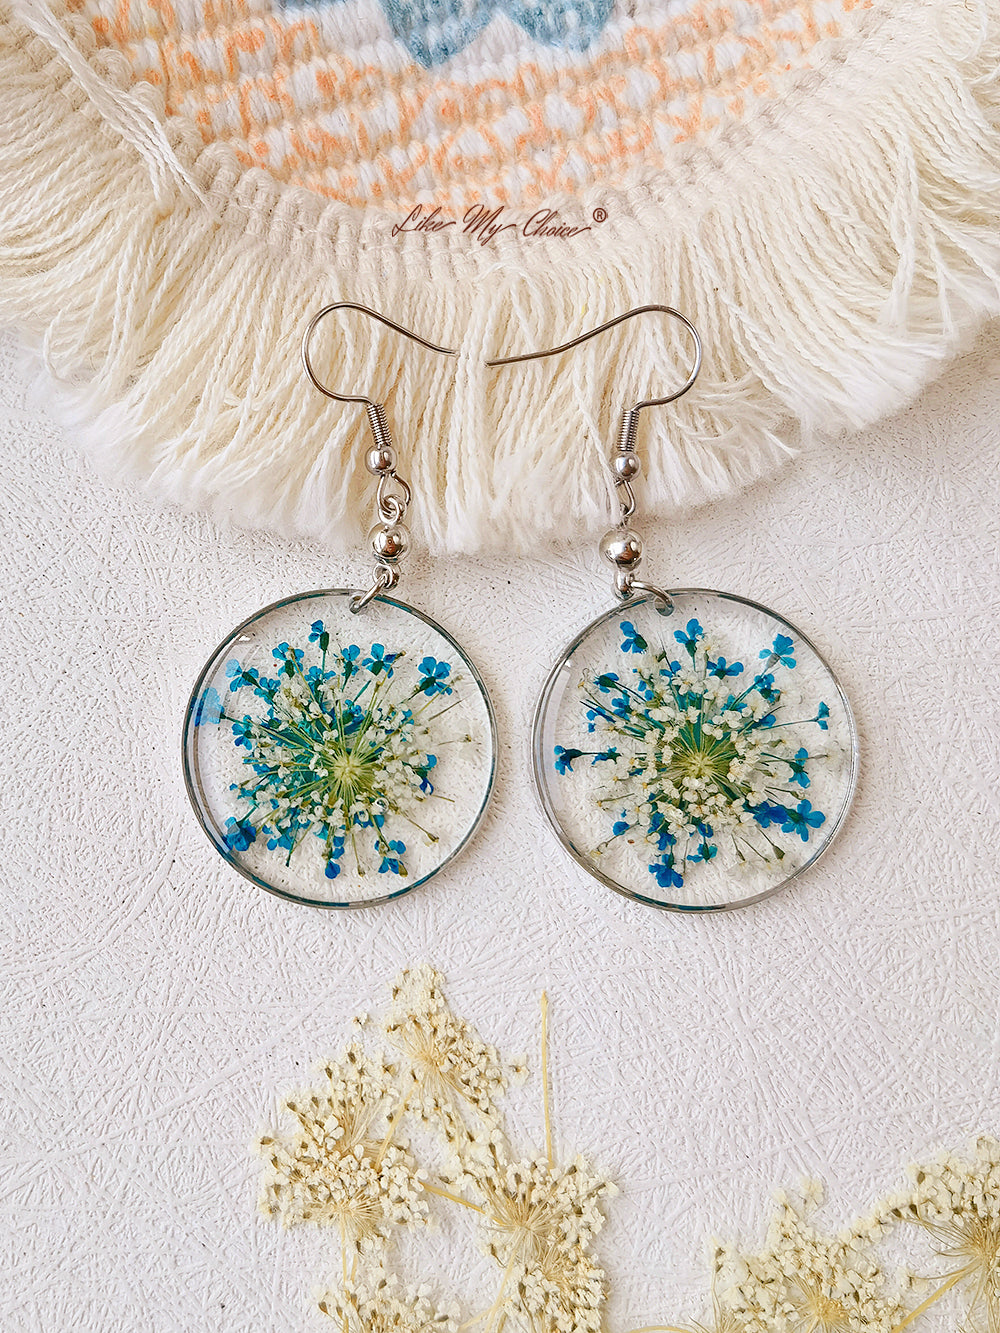 Forget Me Not Queen Anne Lace Resin Pressed Flower Earrings